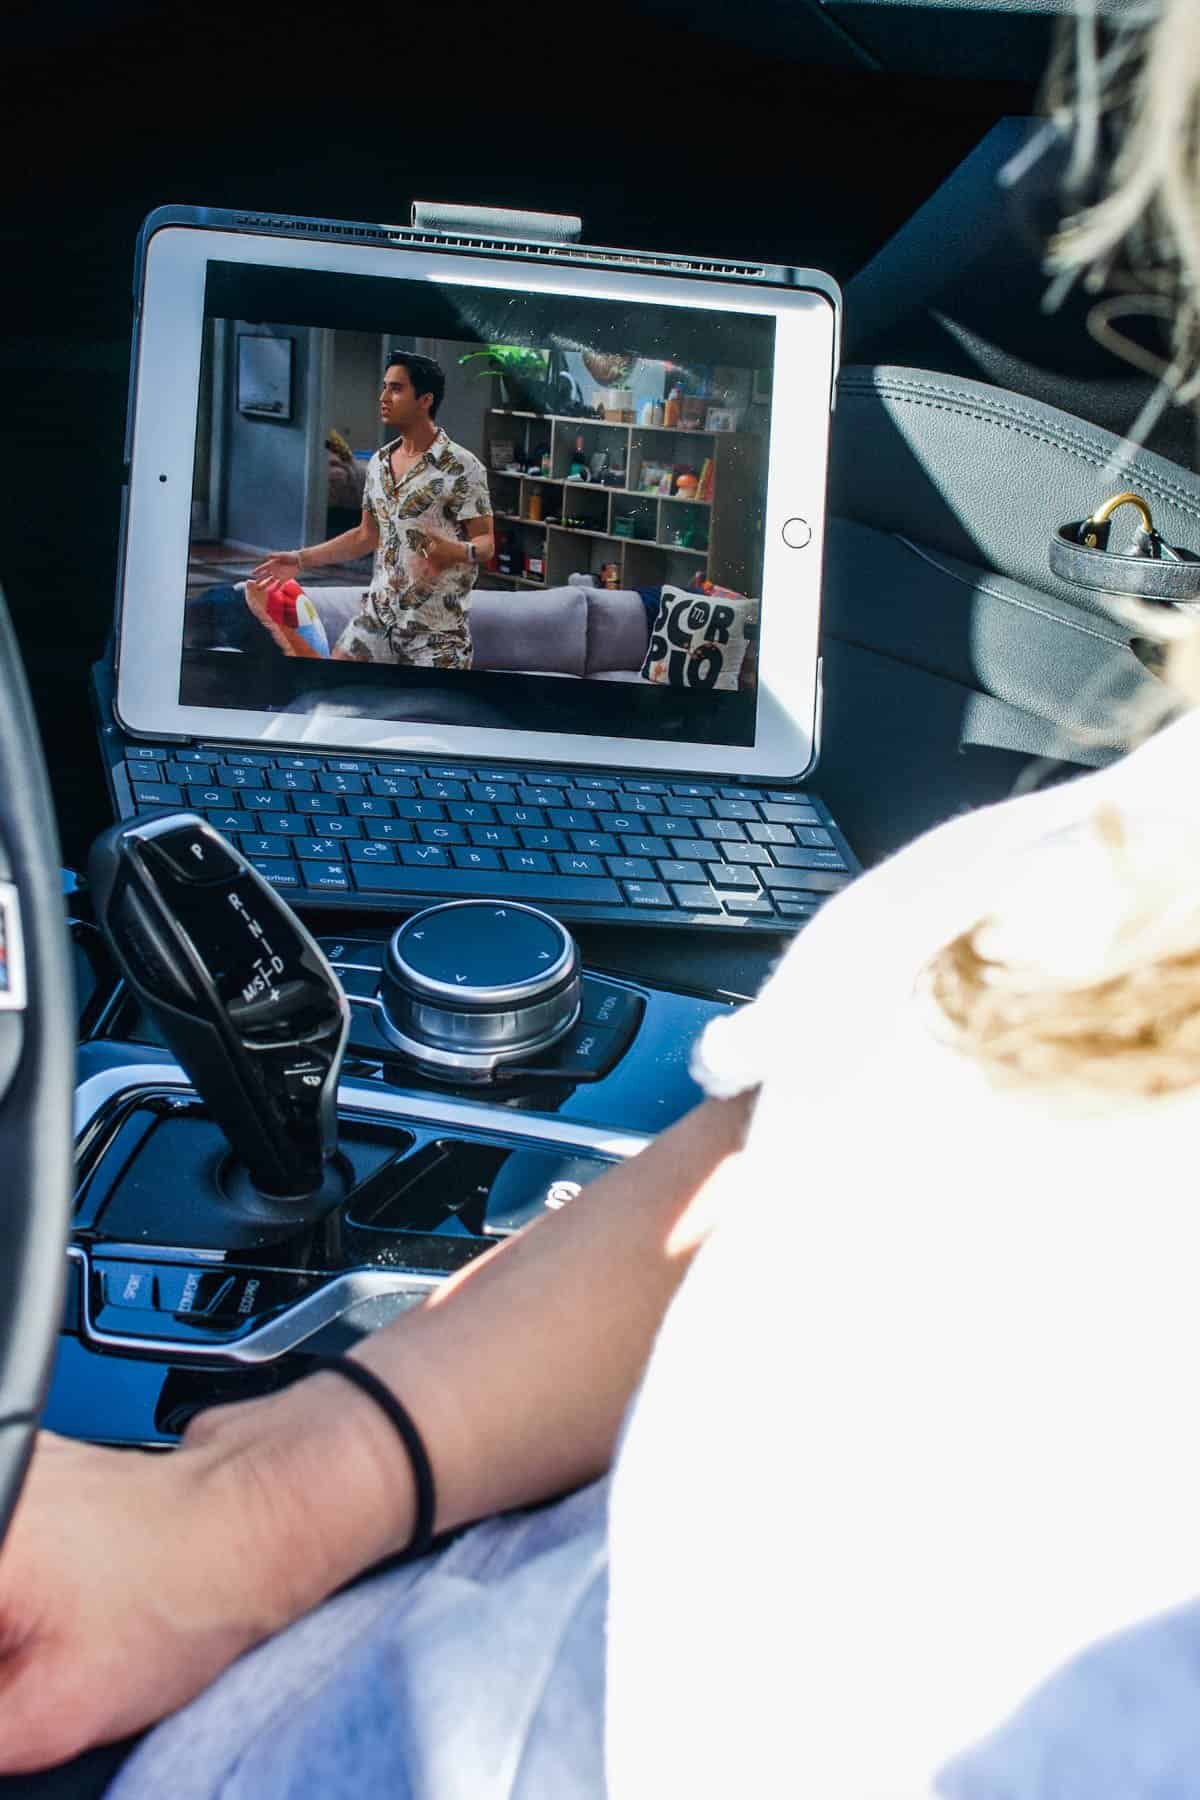 A mom waiting in the car watching an Ipad.